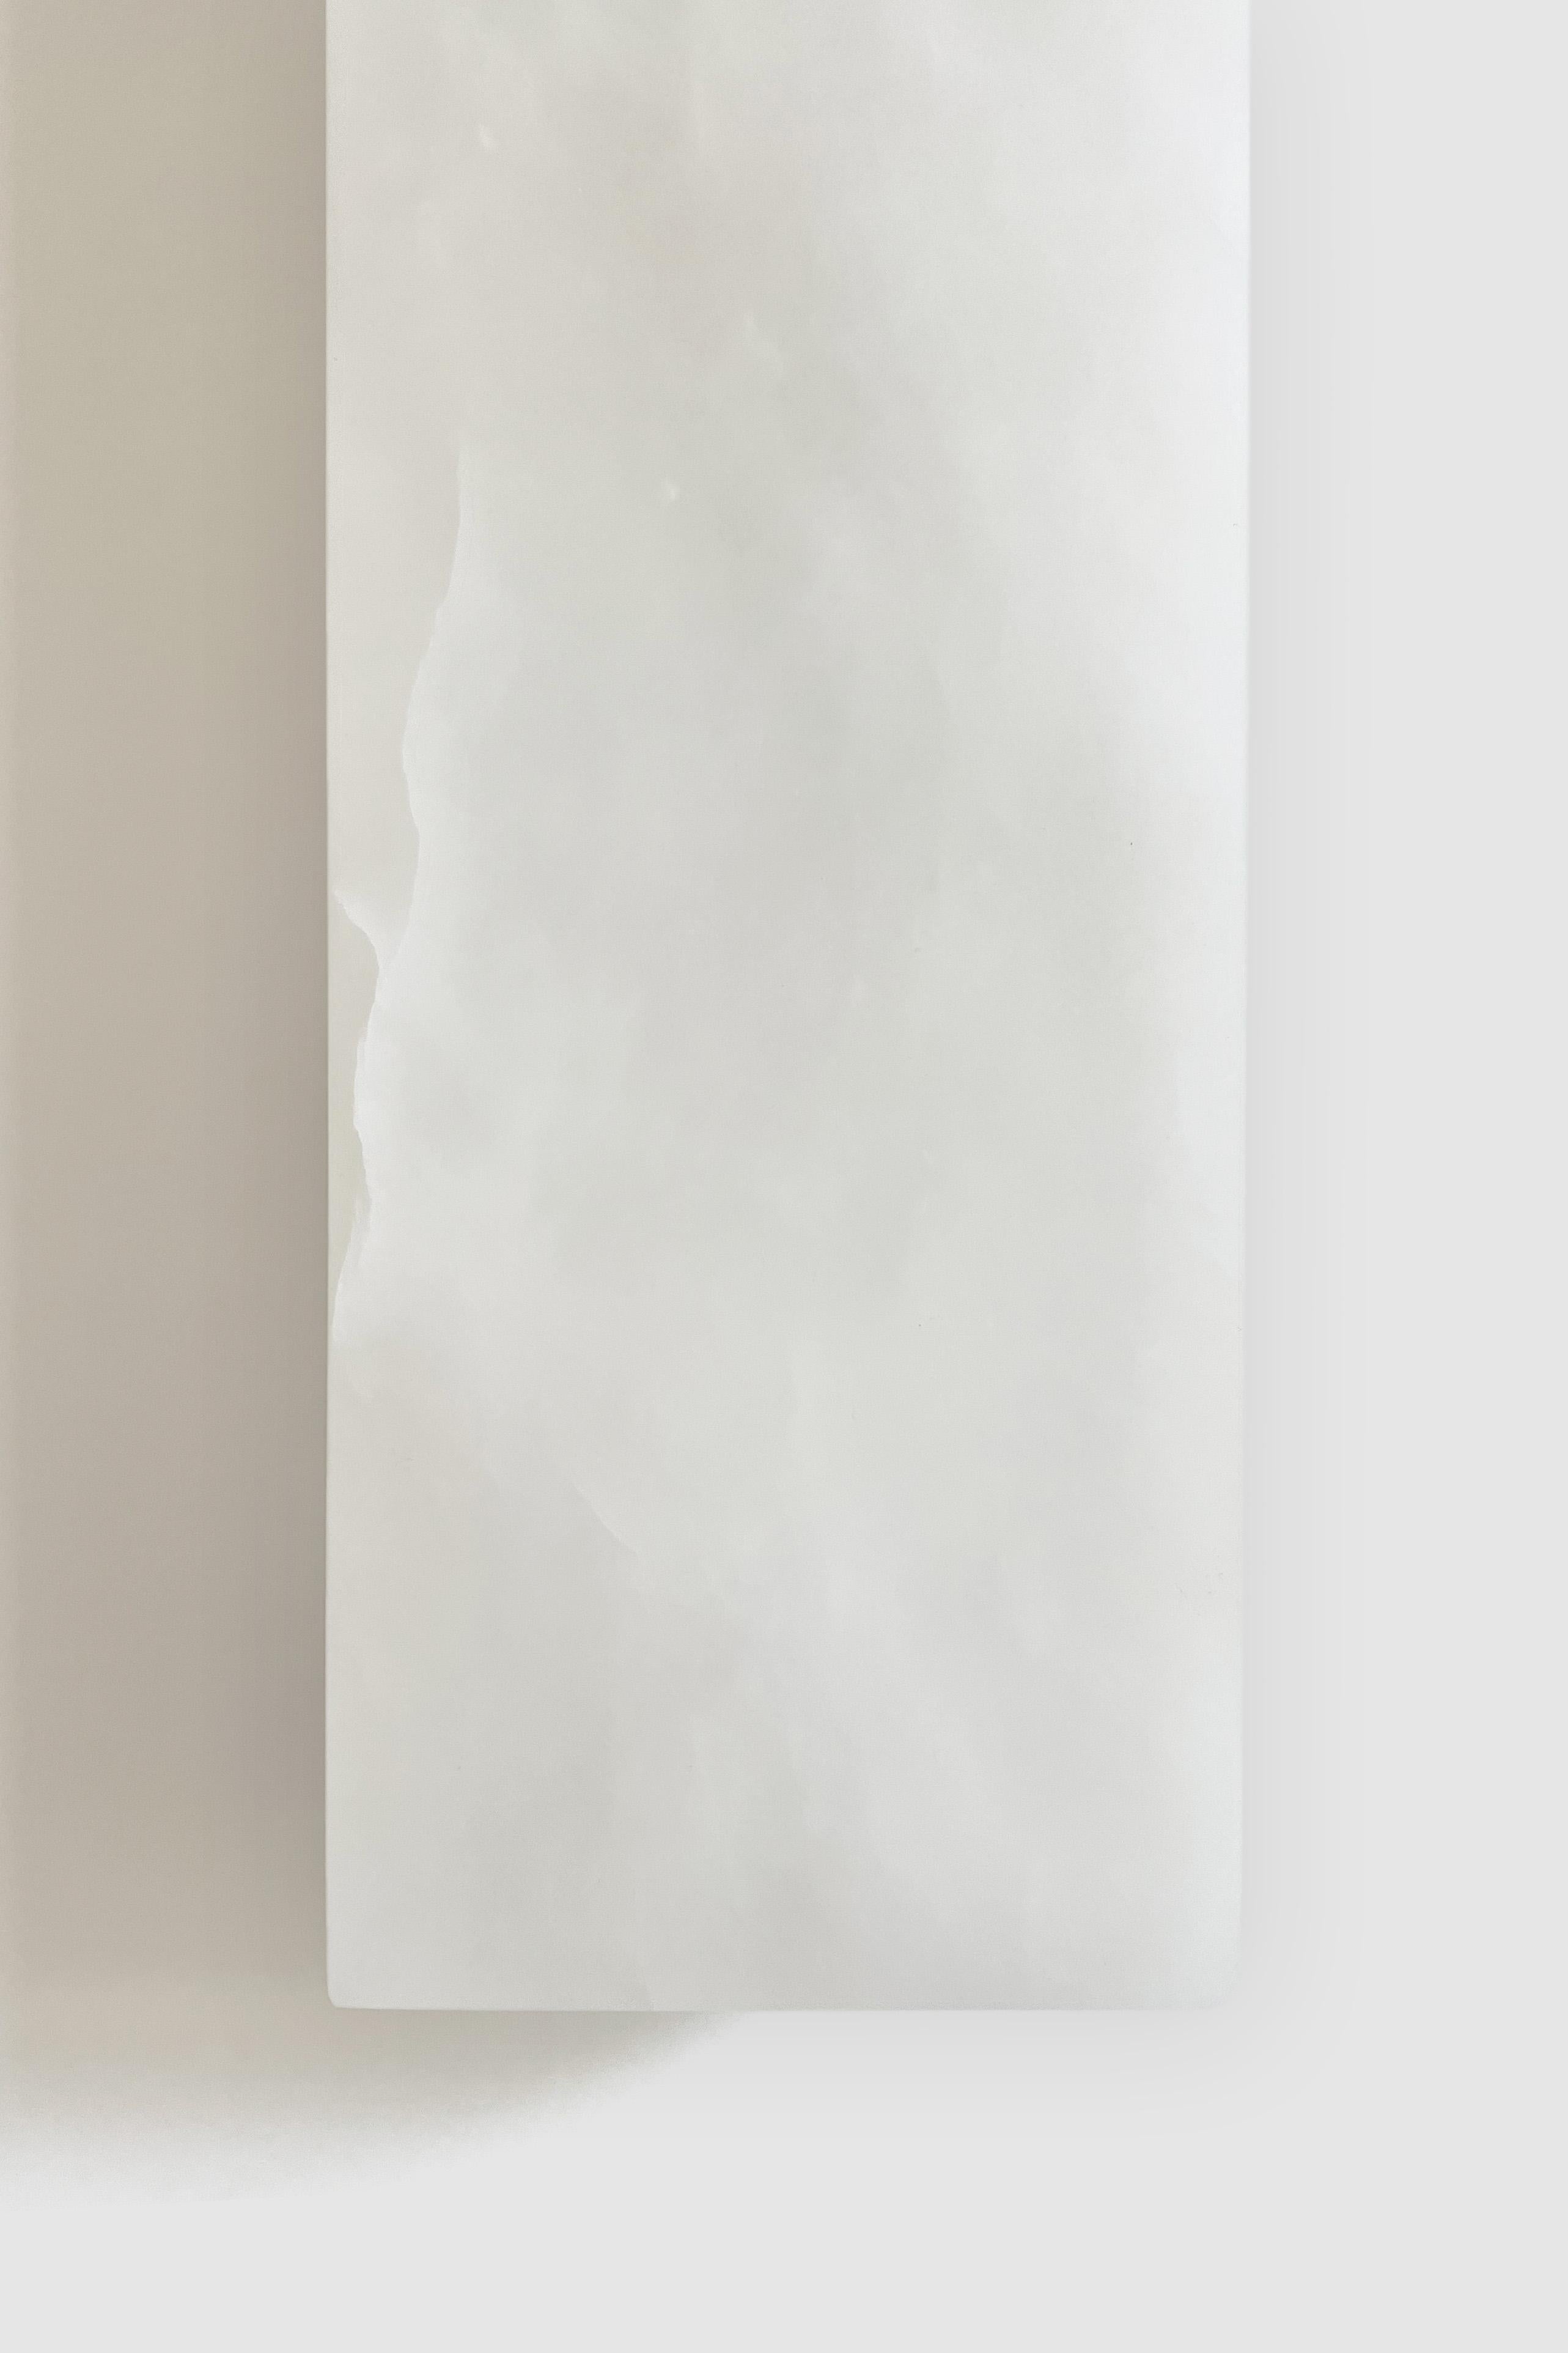 Post-Modern Contemporary Ponti Sconce 003A in Alabaster by Orphan Work For Sale